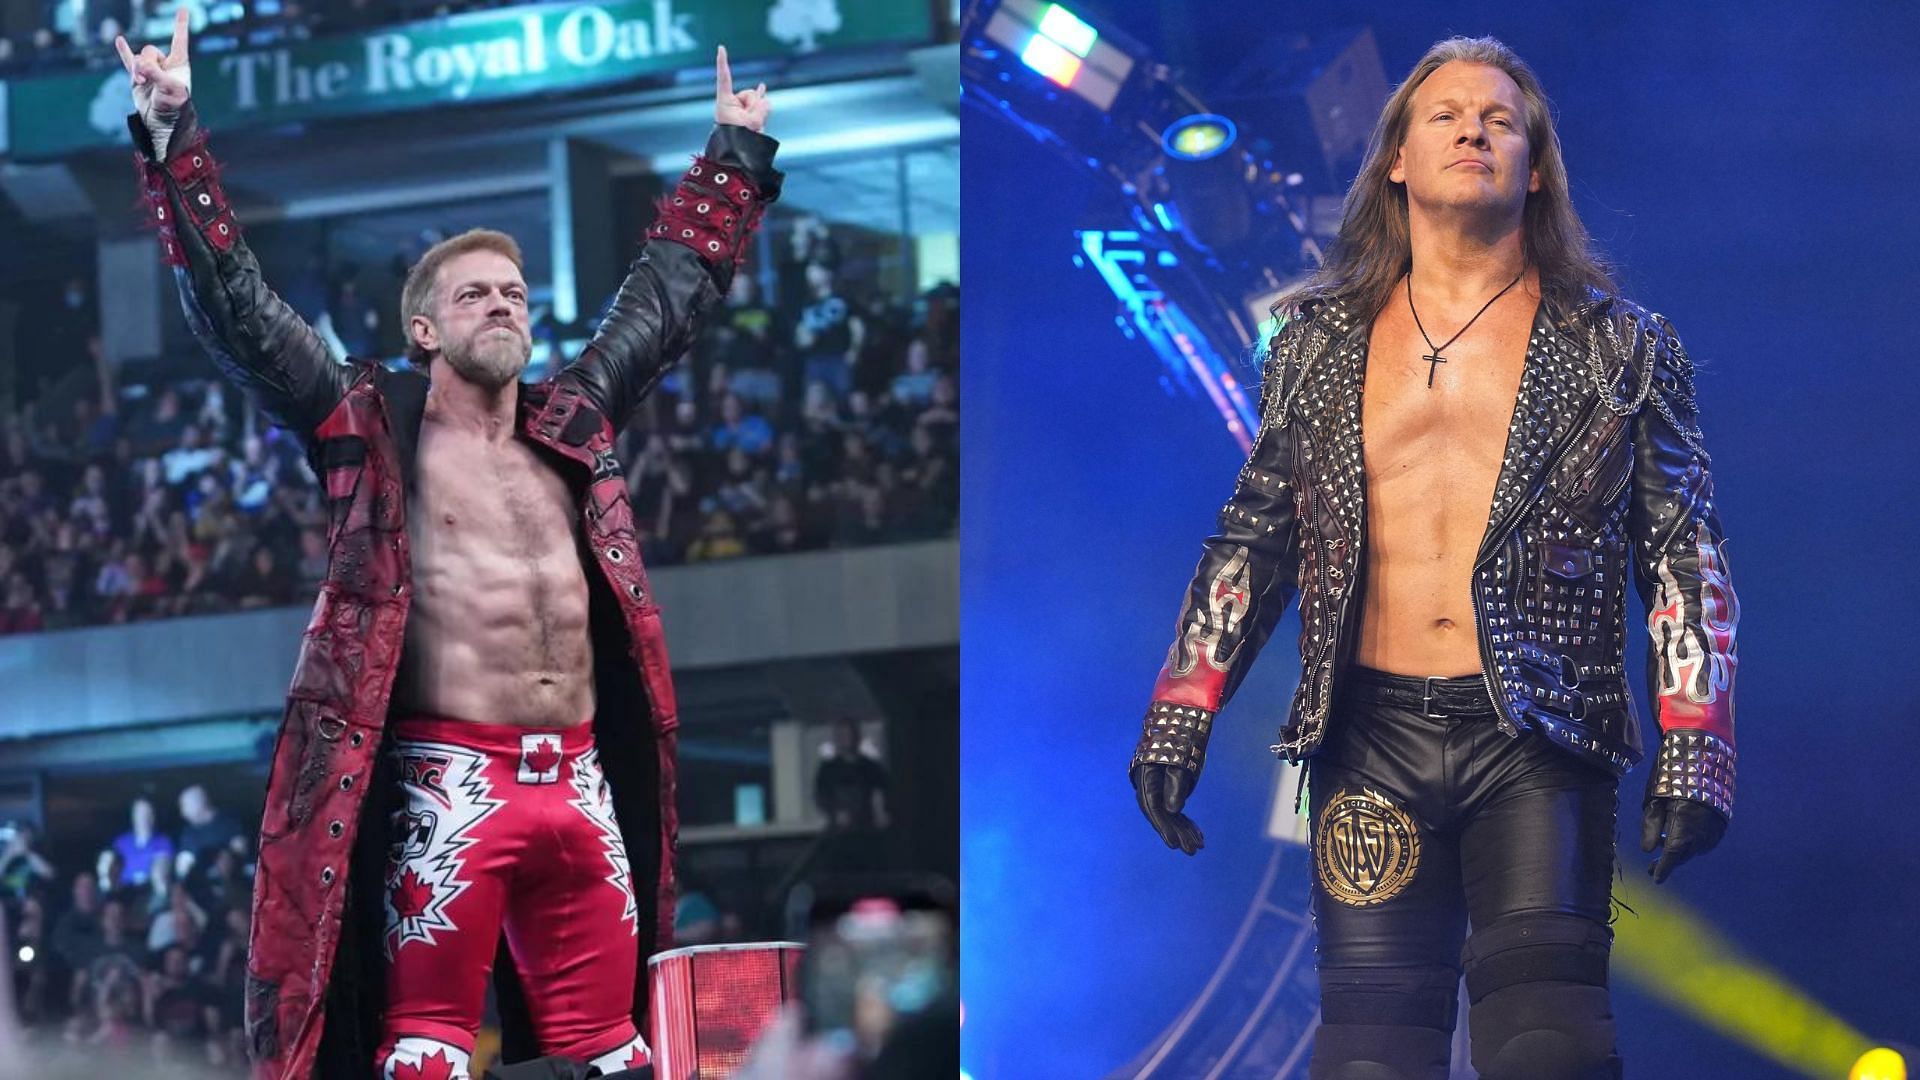 Edge and Chris Jericho previously feuded in WWE